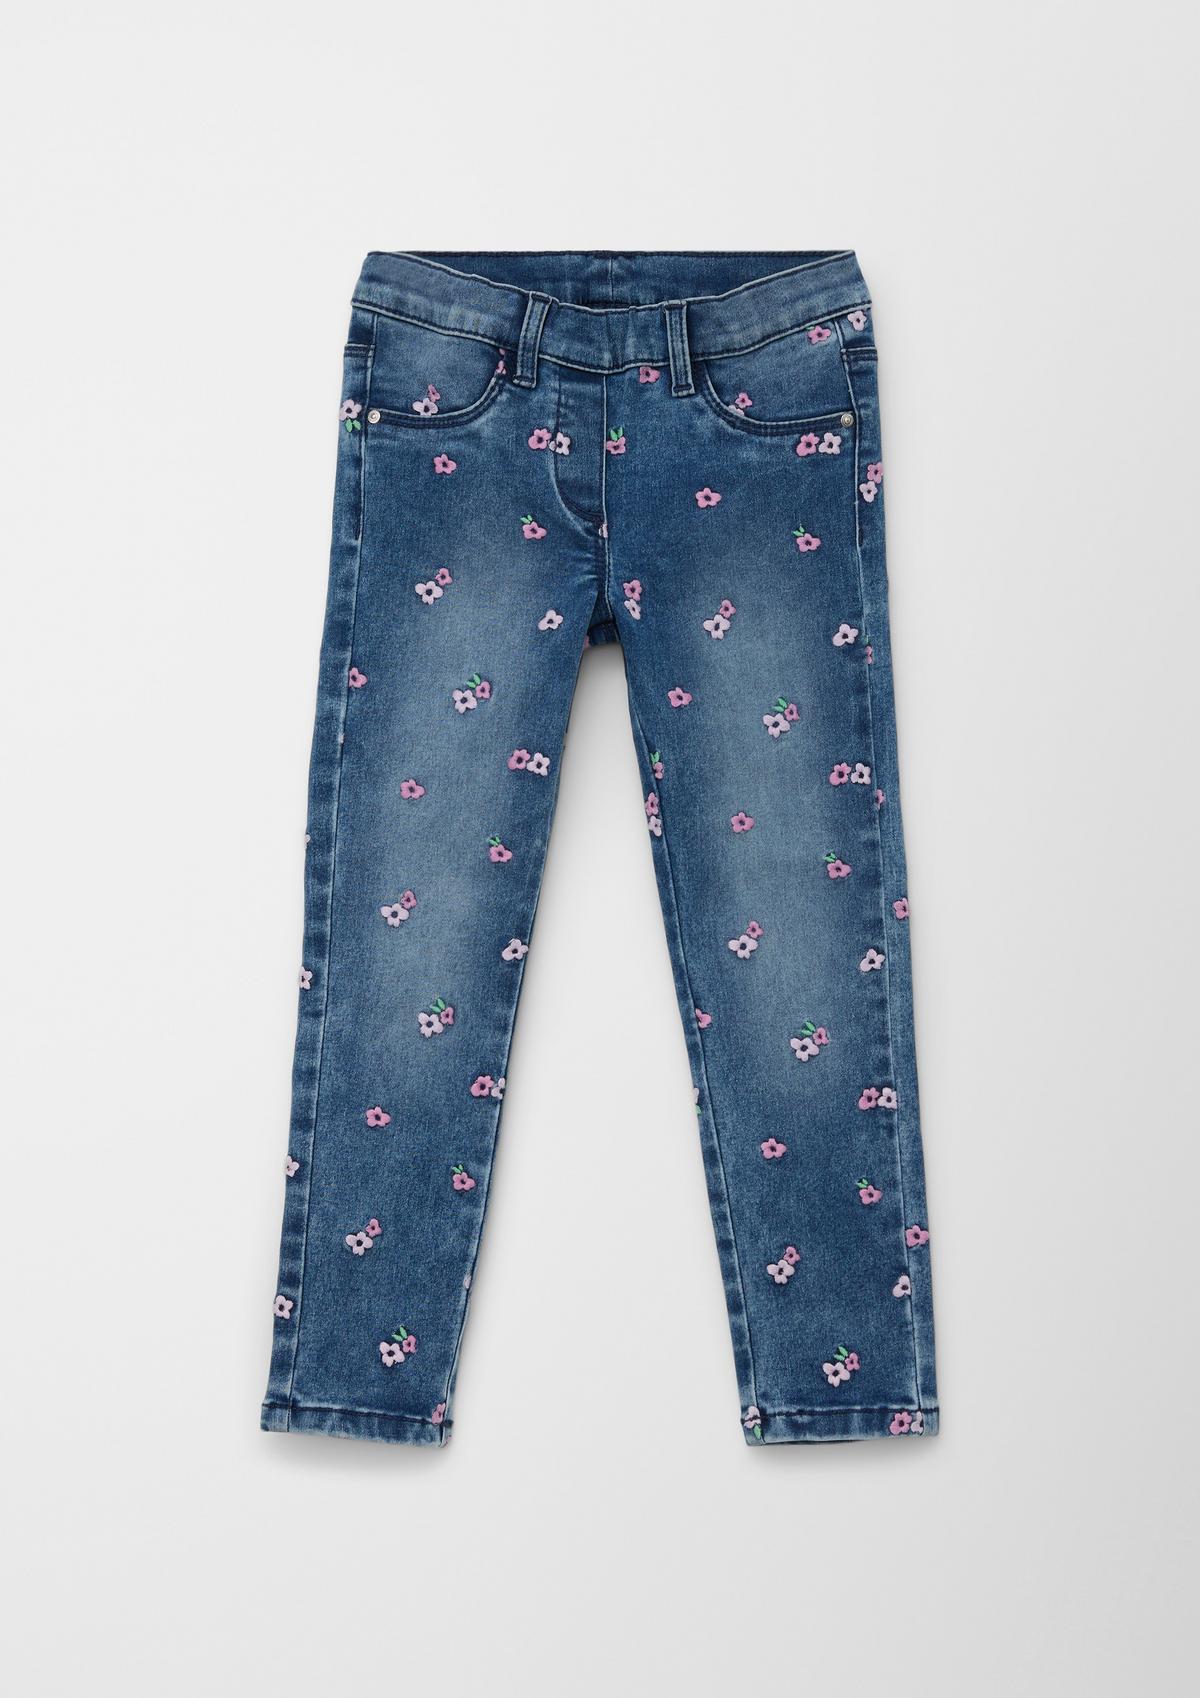 s.Oliver Jeans / slim fit / high rise / slim leg / floral embroidery